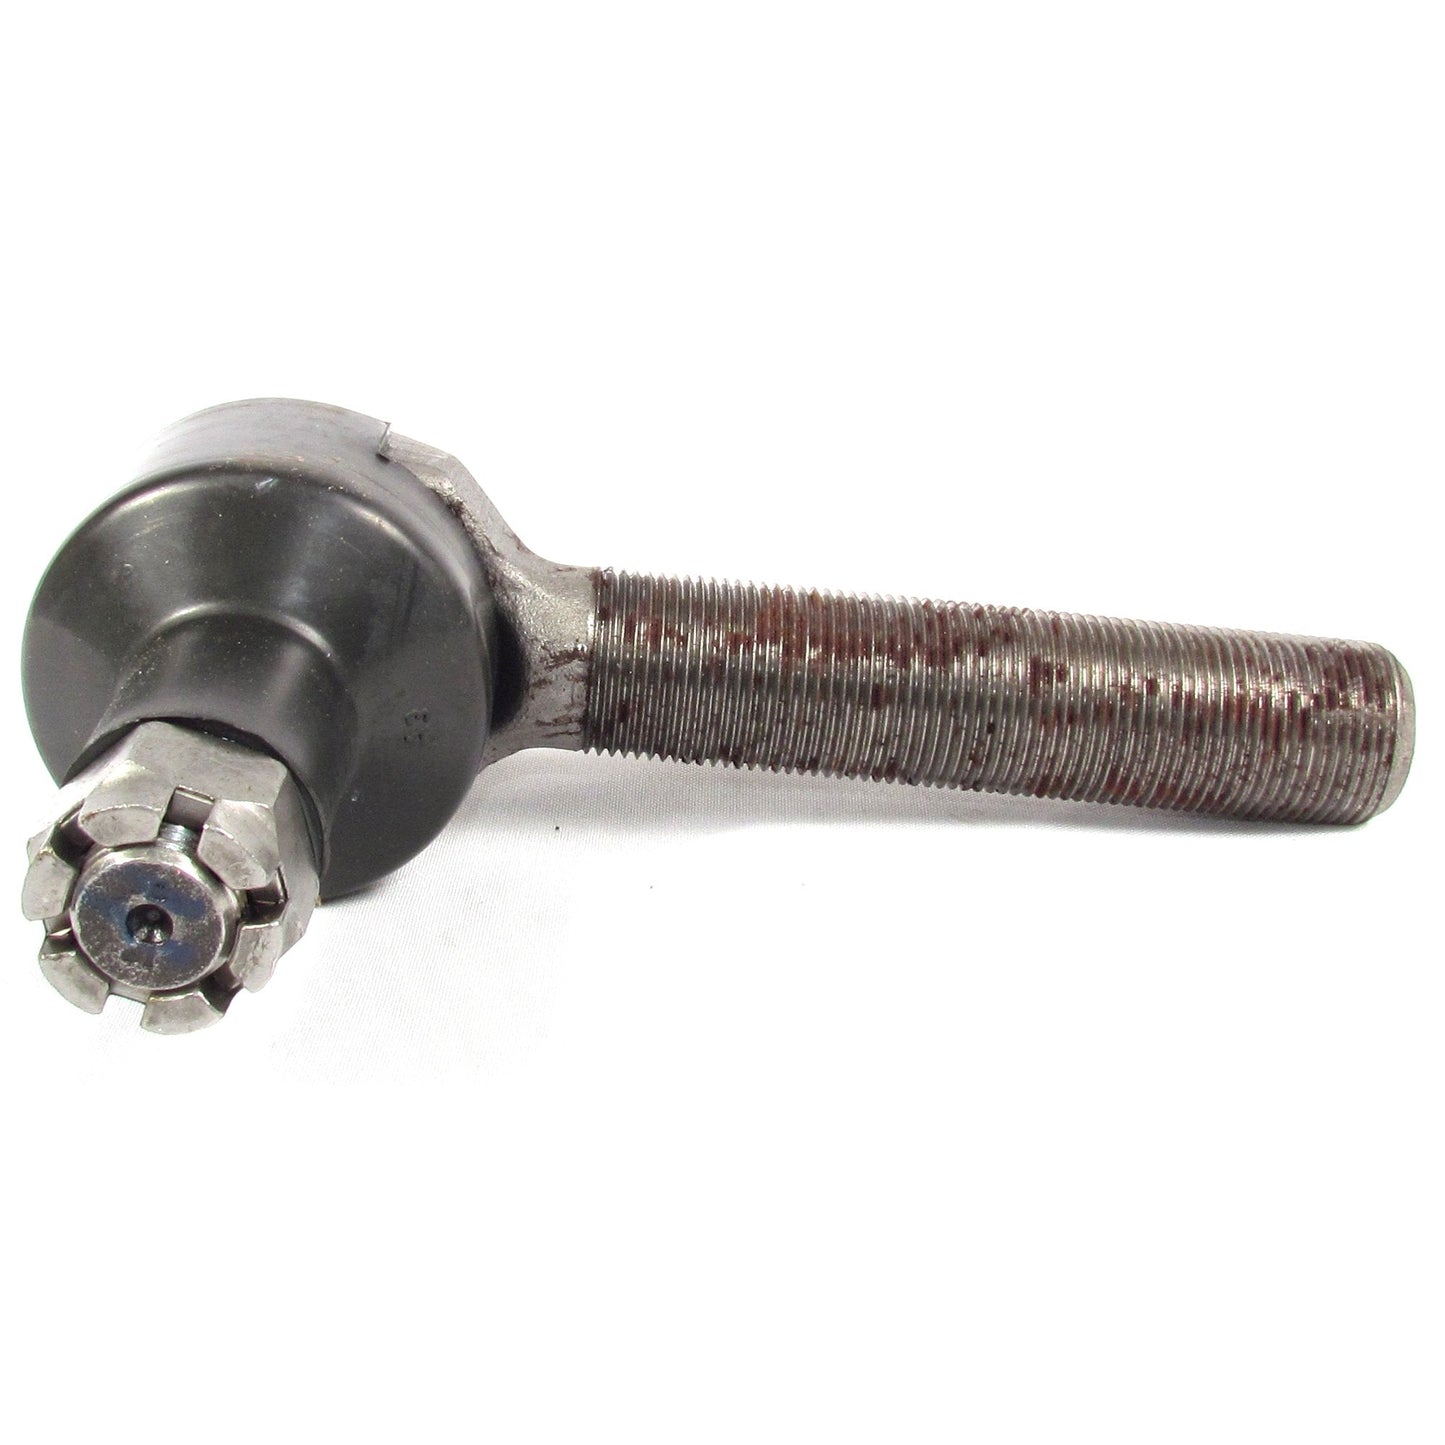 Fortpro Tie Rod End Replacement for Mack 10QH248P6 - Left Side | F265865